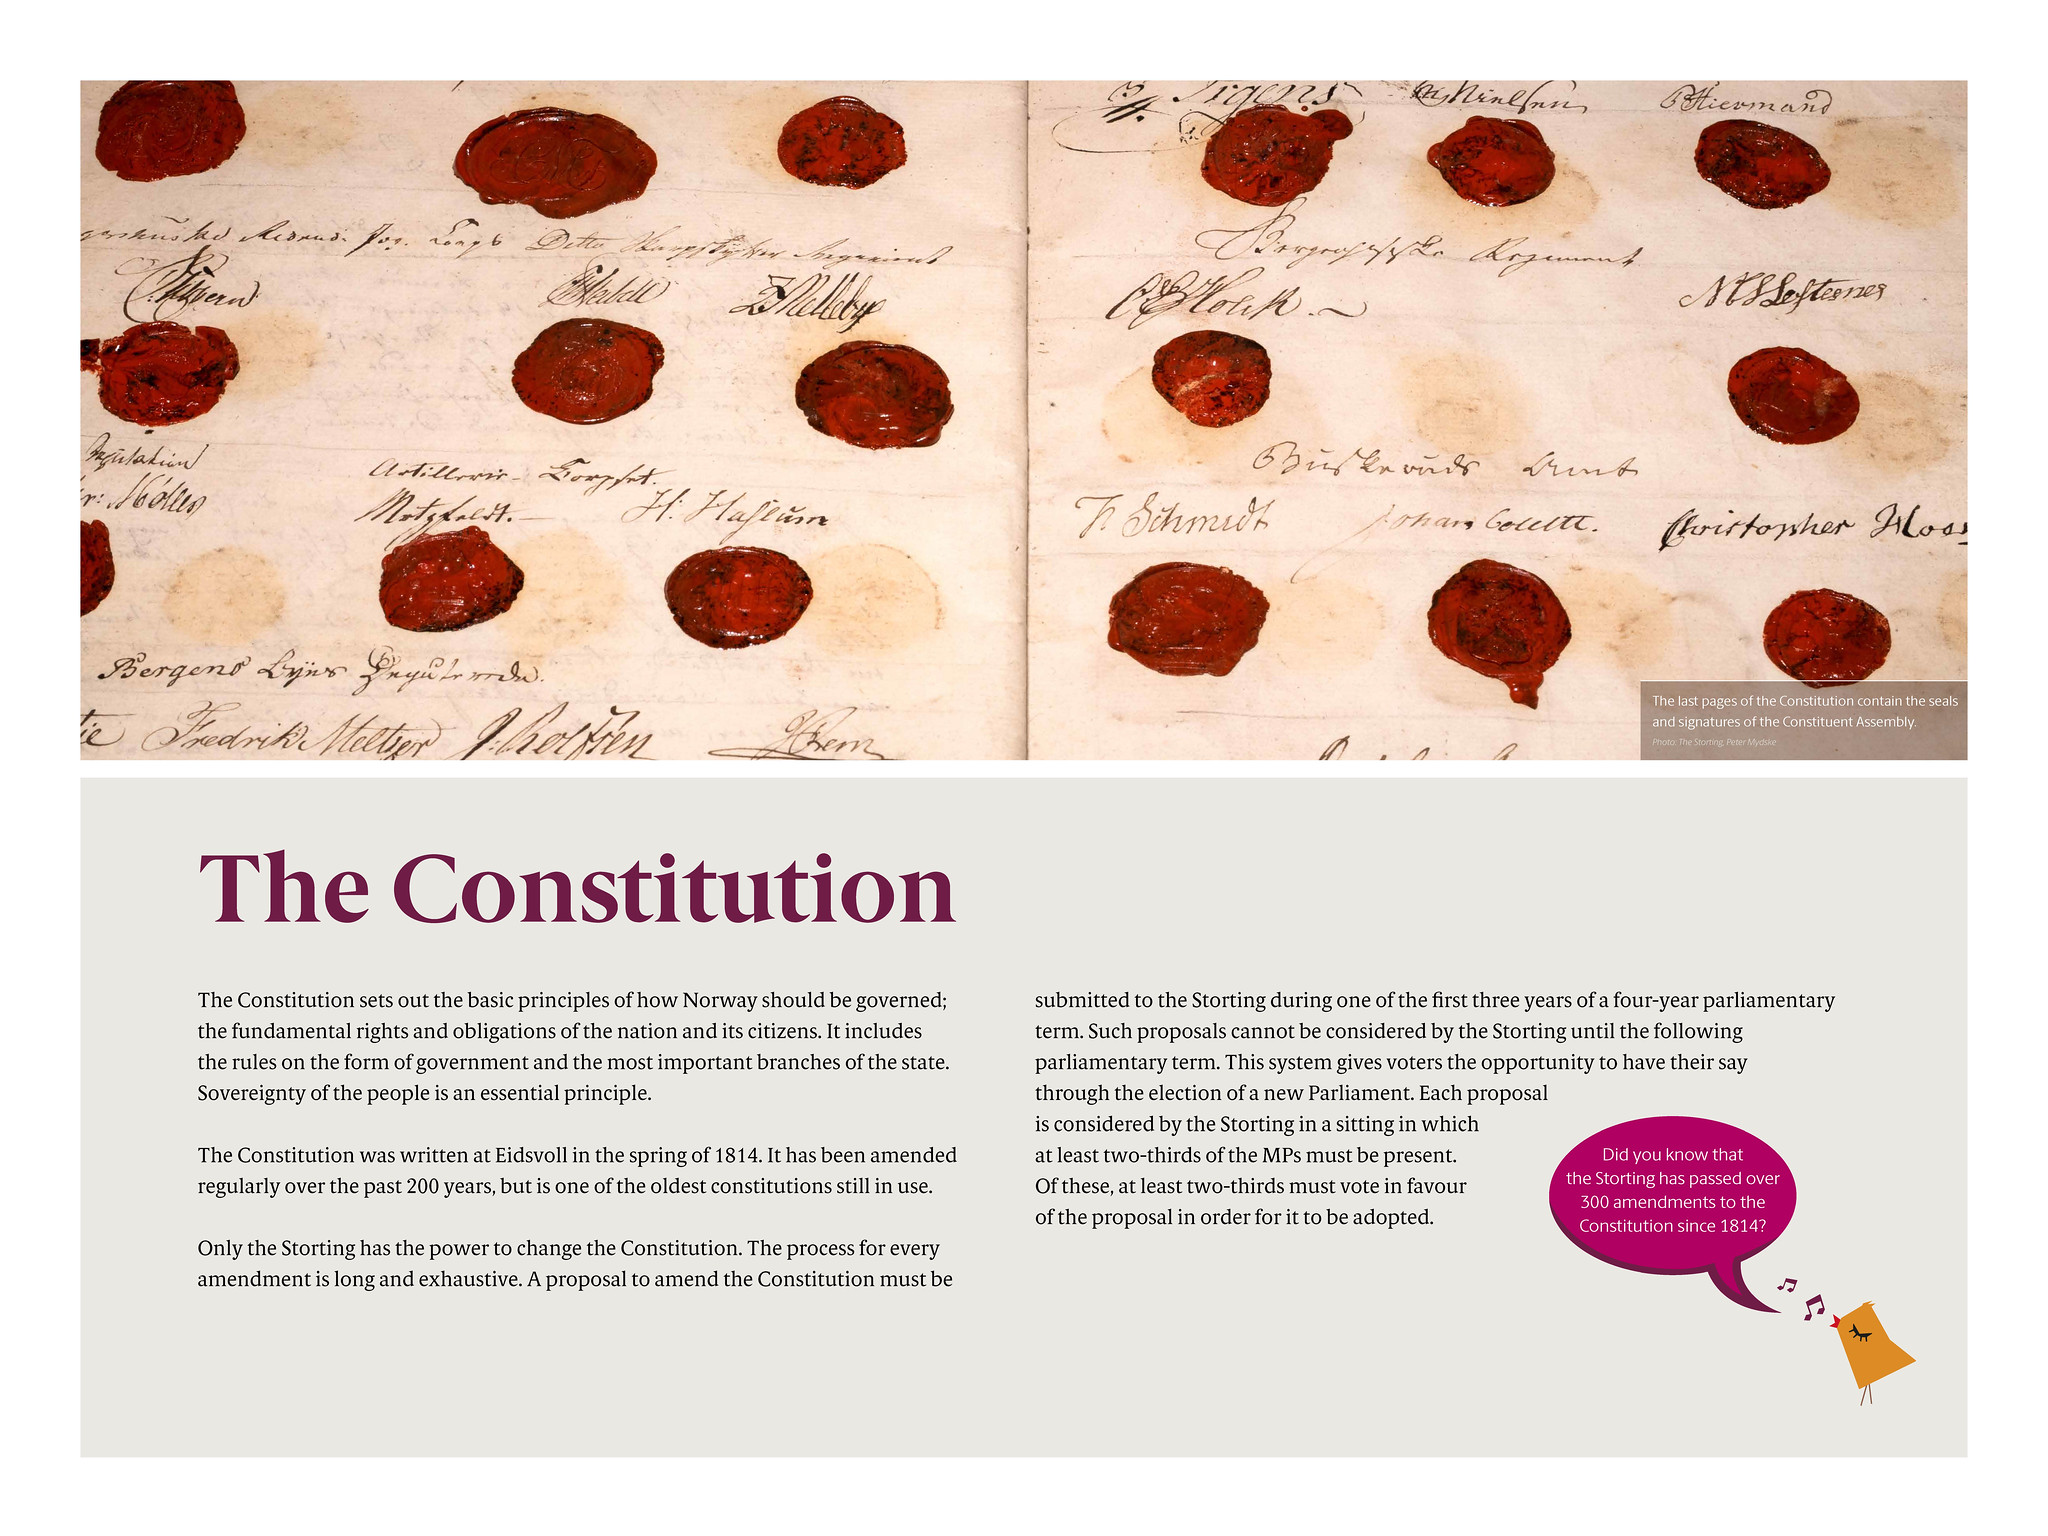 Image of the signatures in the constitution